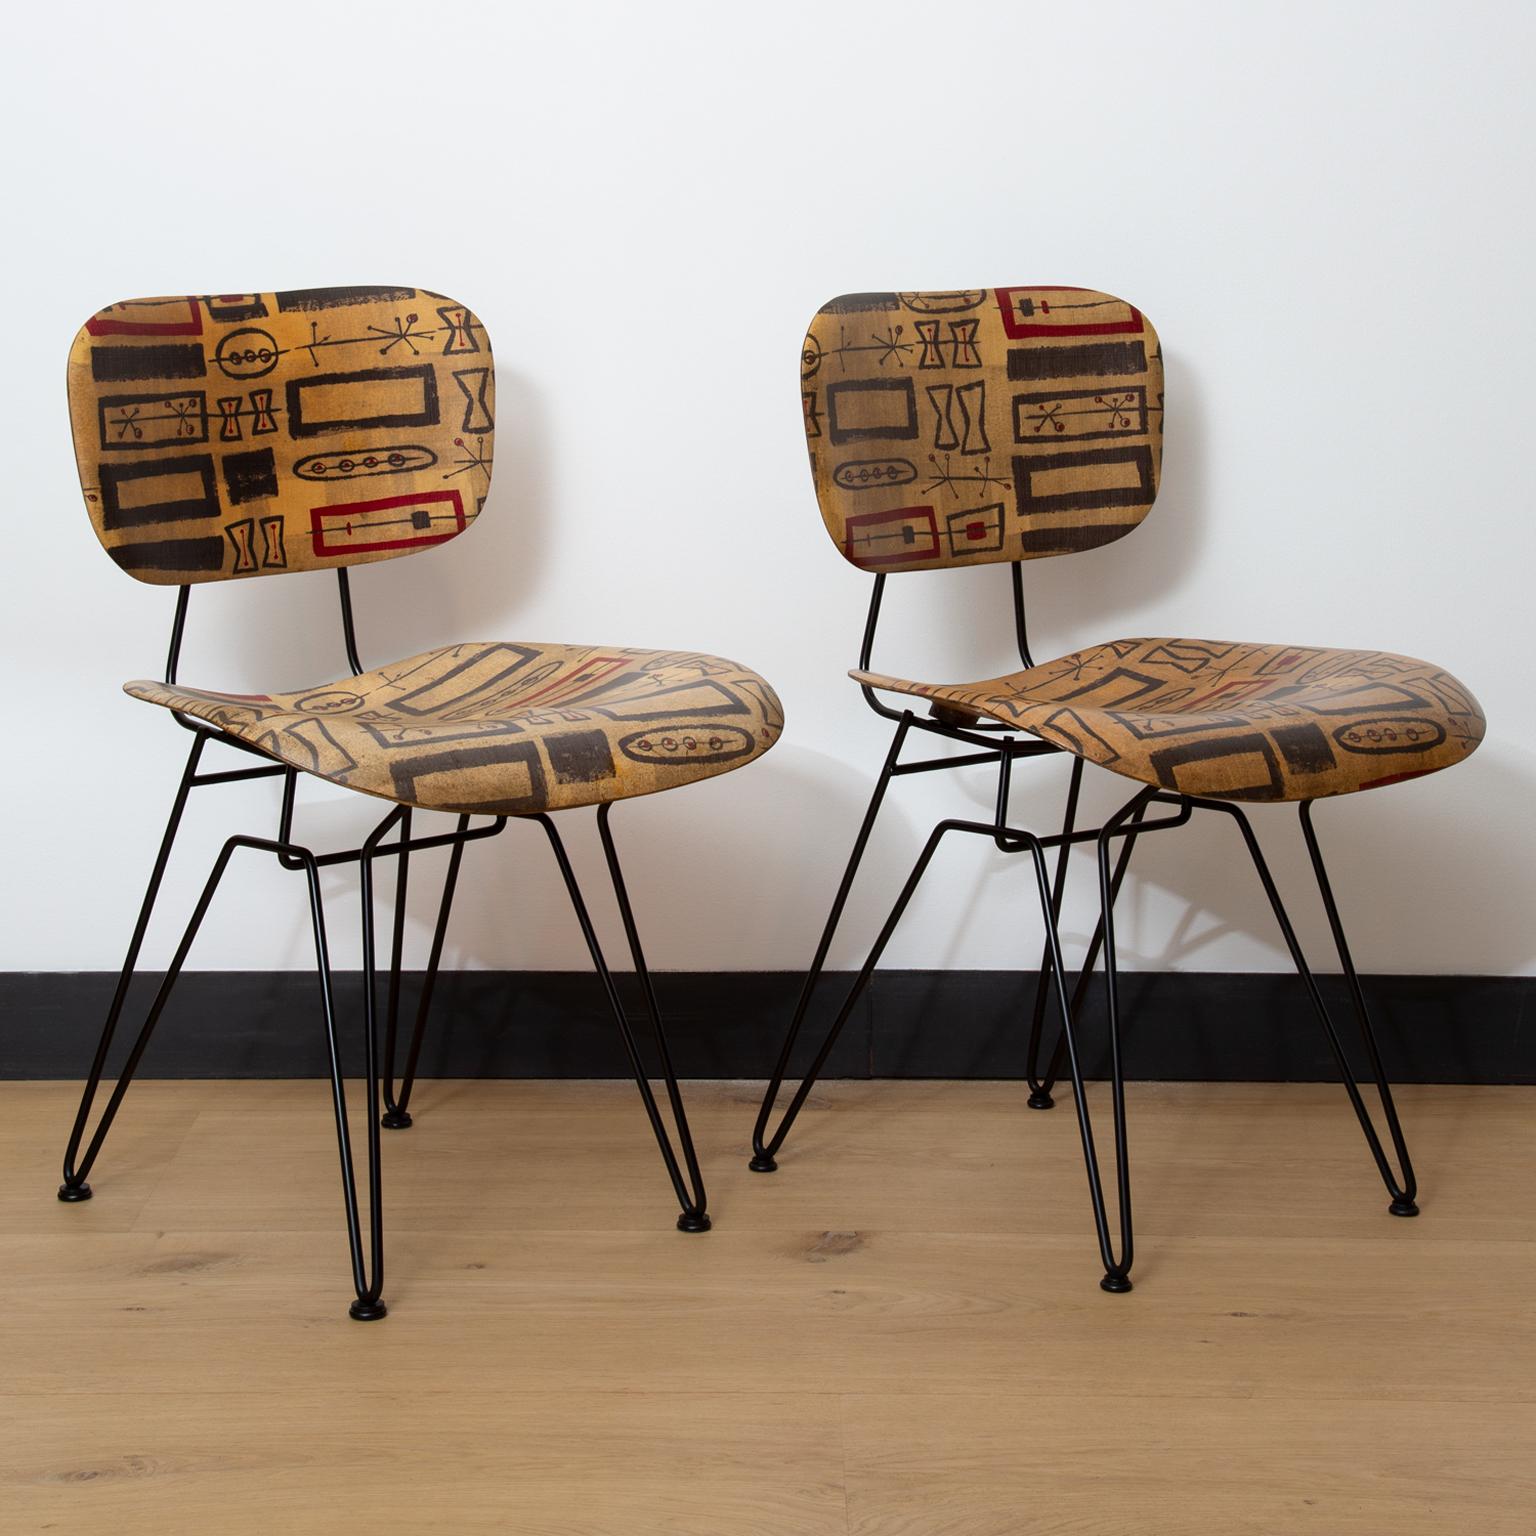 A set of 4 side/dining chairs designed by Hobart Wells for Lensol-Wells. The seat and backs feature an abstract pattern from fabric which has been encased in moulded fibreglass, with the wire metal frames made from black enamelled steel further